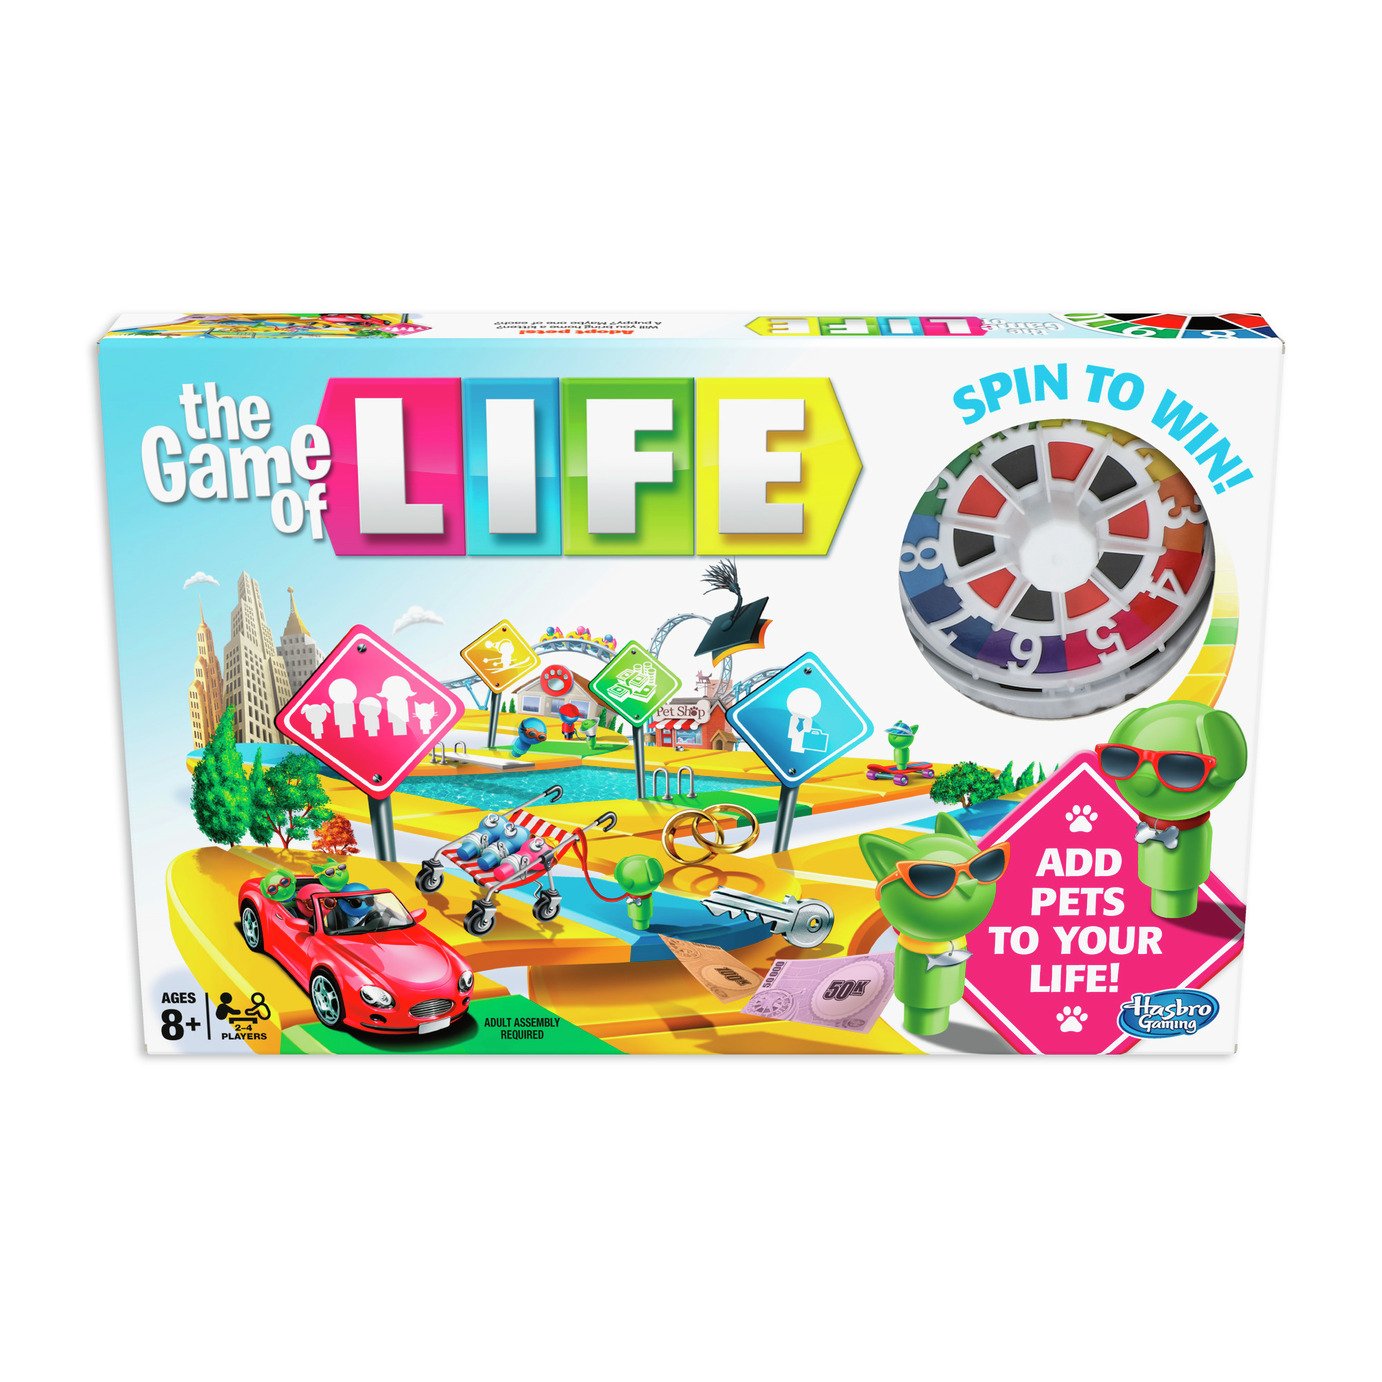 The Game of Life from Hasbro Gaming